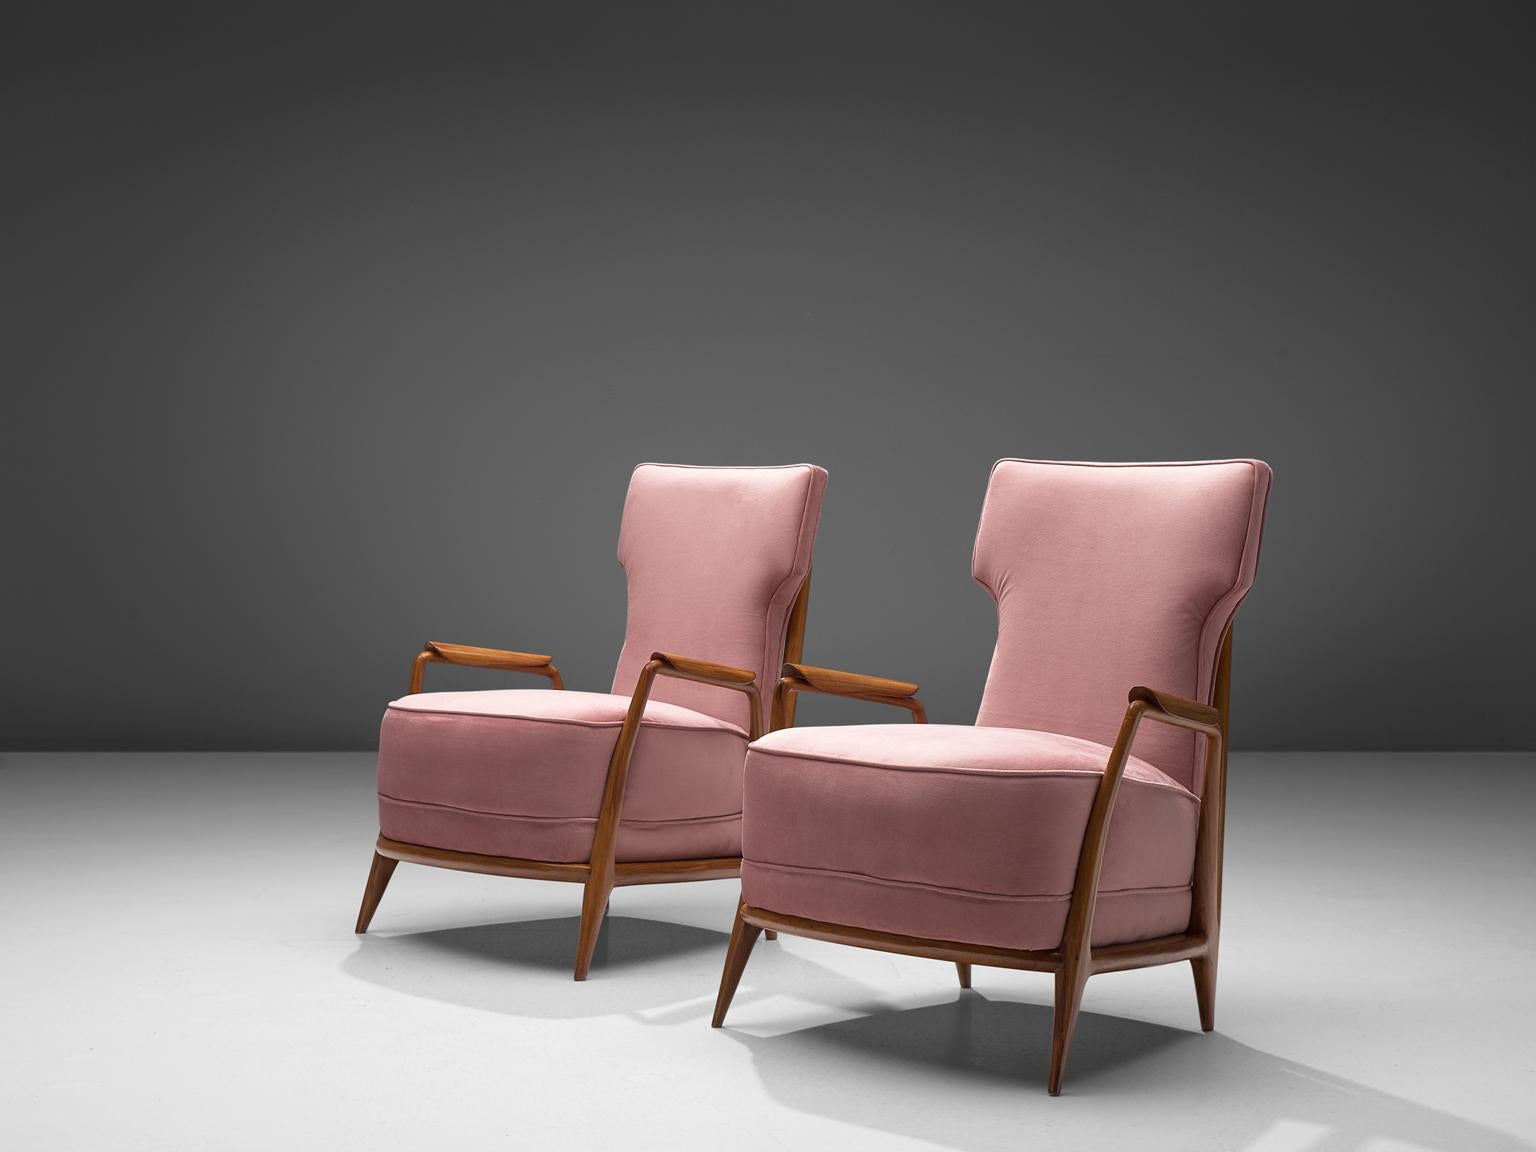 Giuseppi Scapinelli, set of 2 lounge chairs in caviuna wood and pink suede, 1950s, Brazil.

Elegant easy chairs with spoke back. This chair in caviuna wood exposes the beautiful grain of the wood in an eloquent manner. This chair is one of